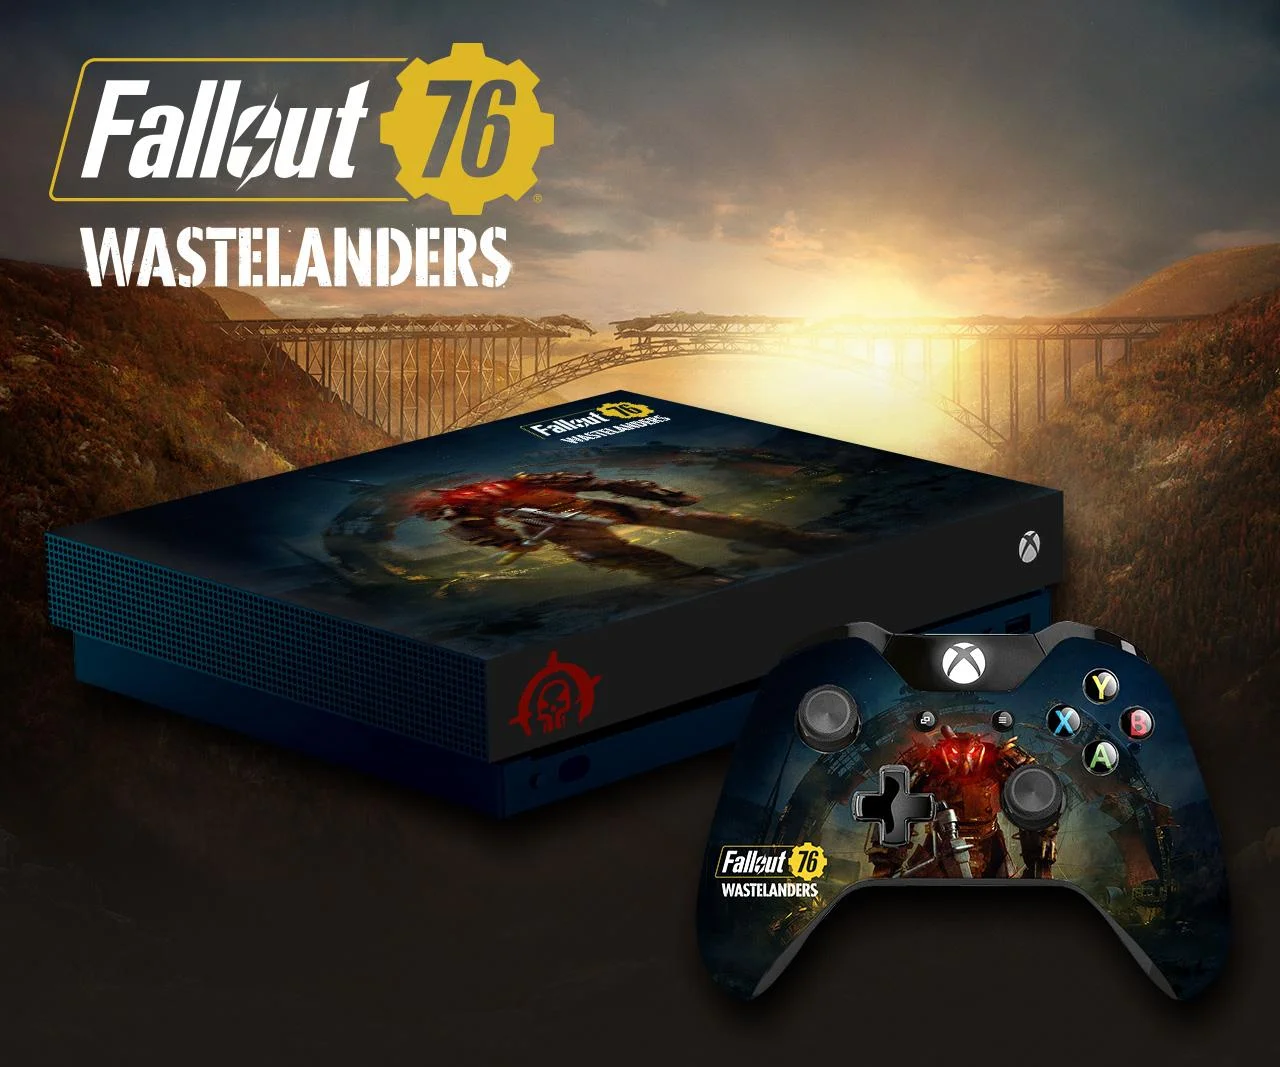  Microsoft Xbox One X Fallout 76 Wastelanders Console